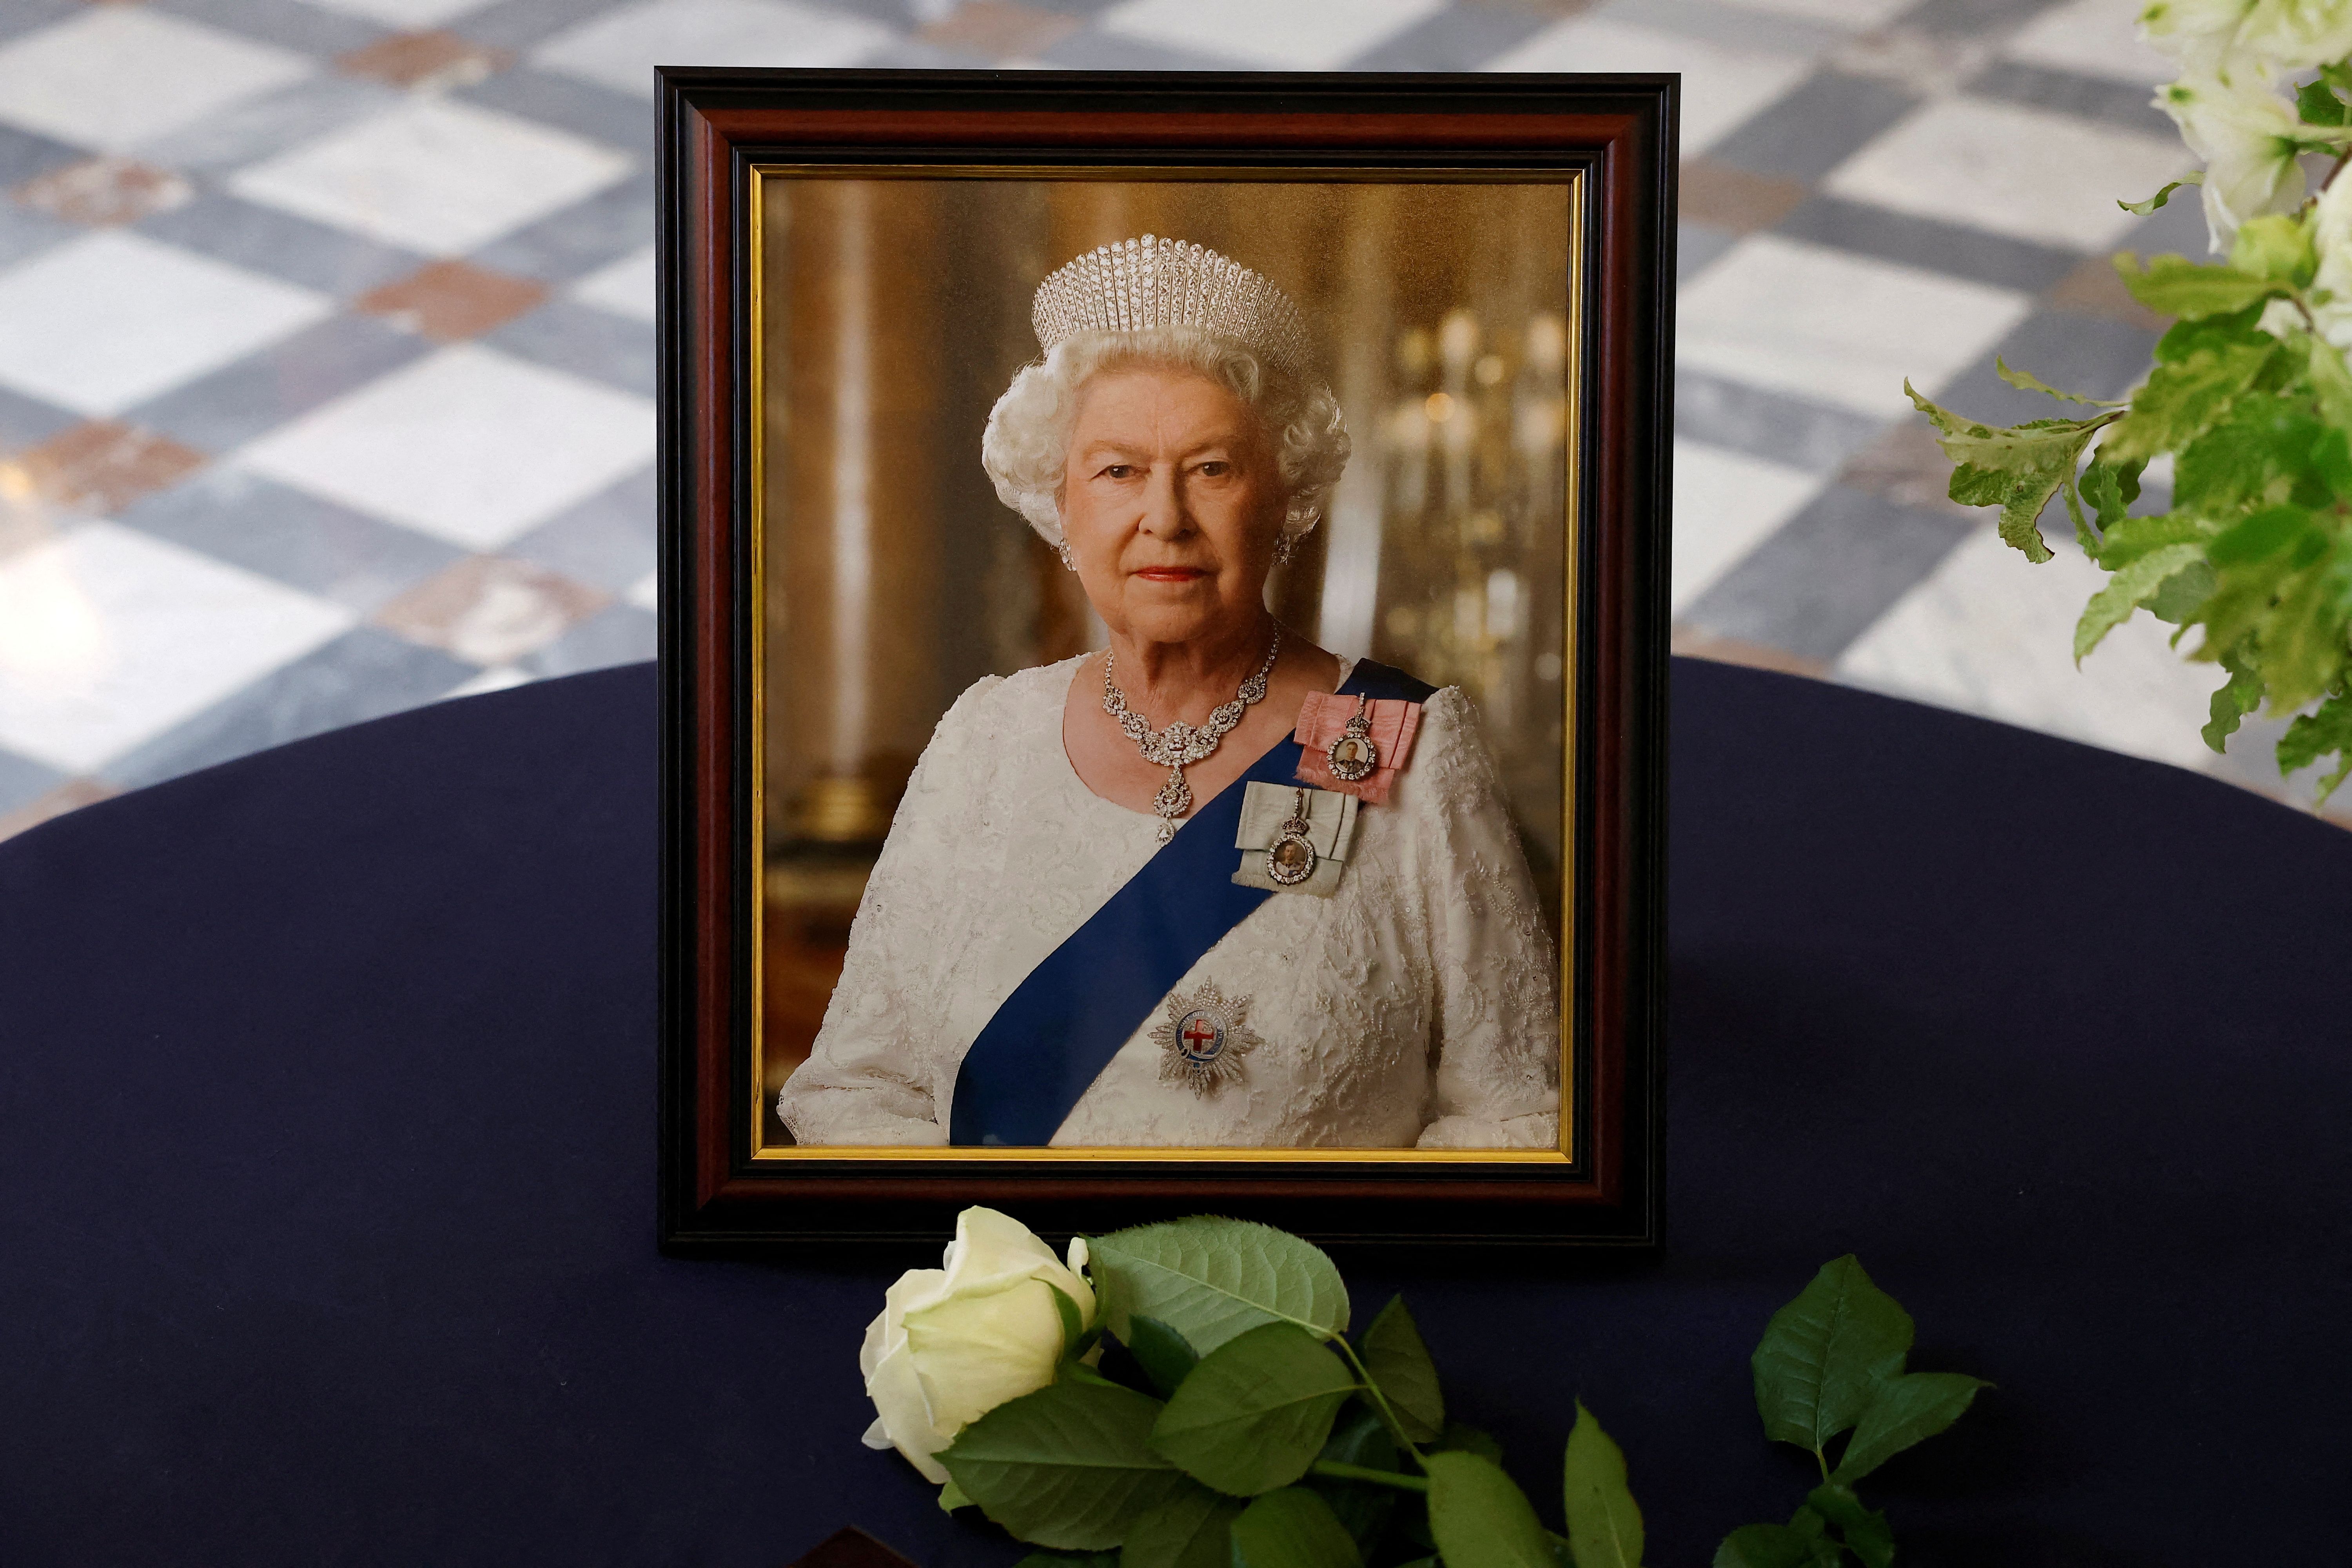 A portrait of Queen Elizabeth II displayed at the British Embassy in Paris on September 9, 2022, a day after the Queen died at the age of 96. | Source: Getty Images